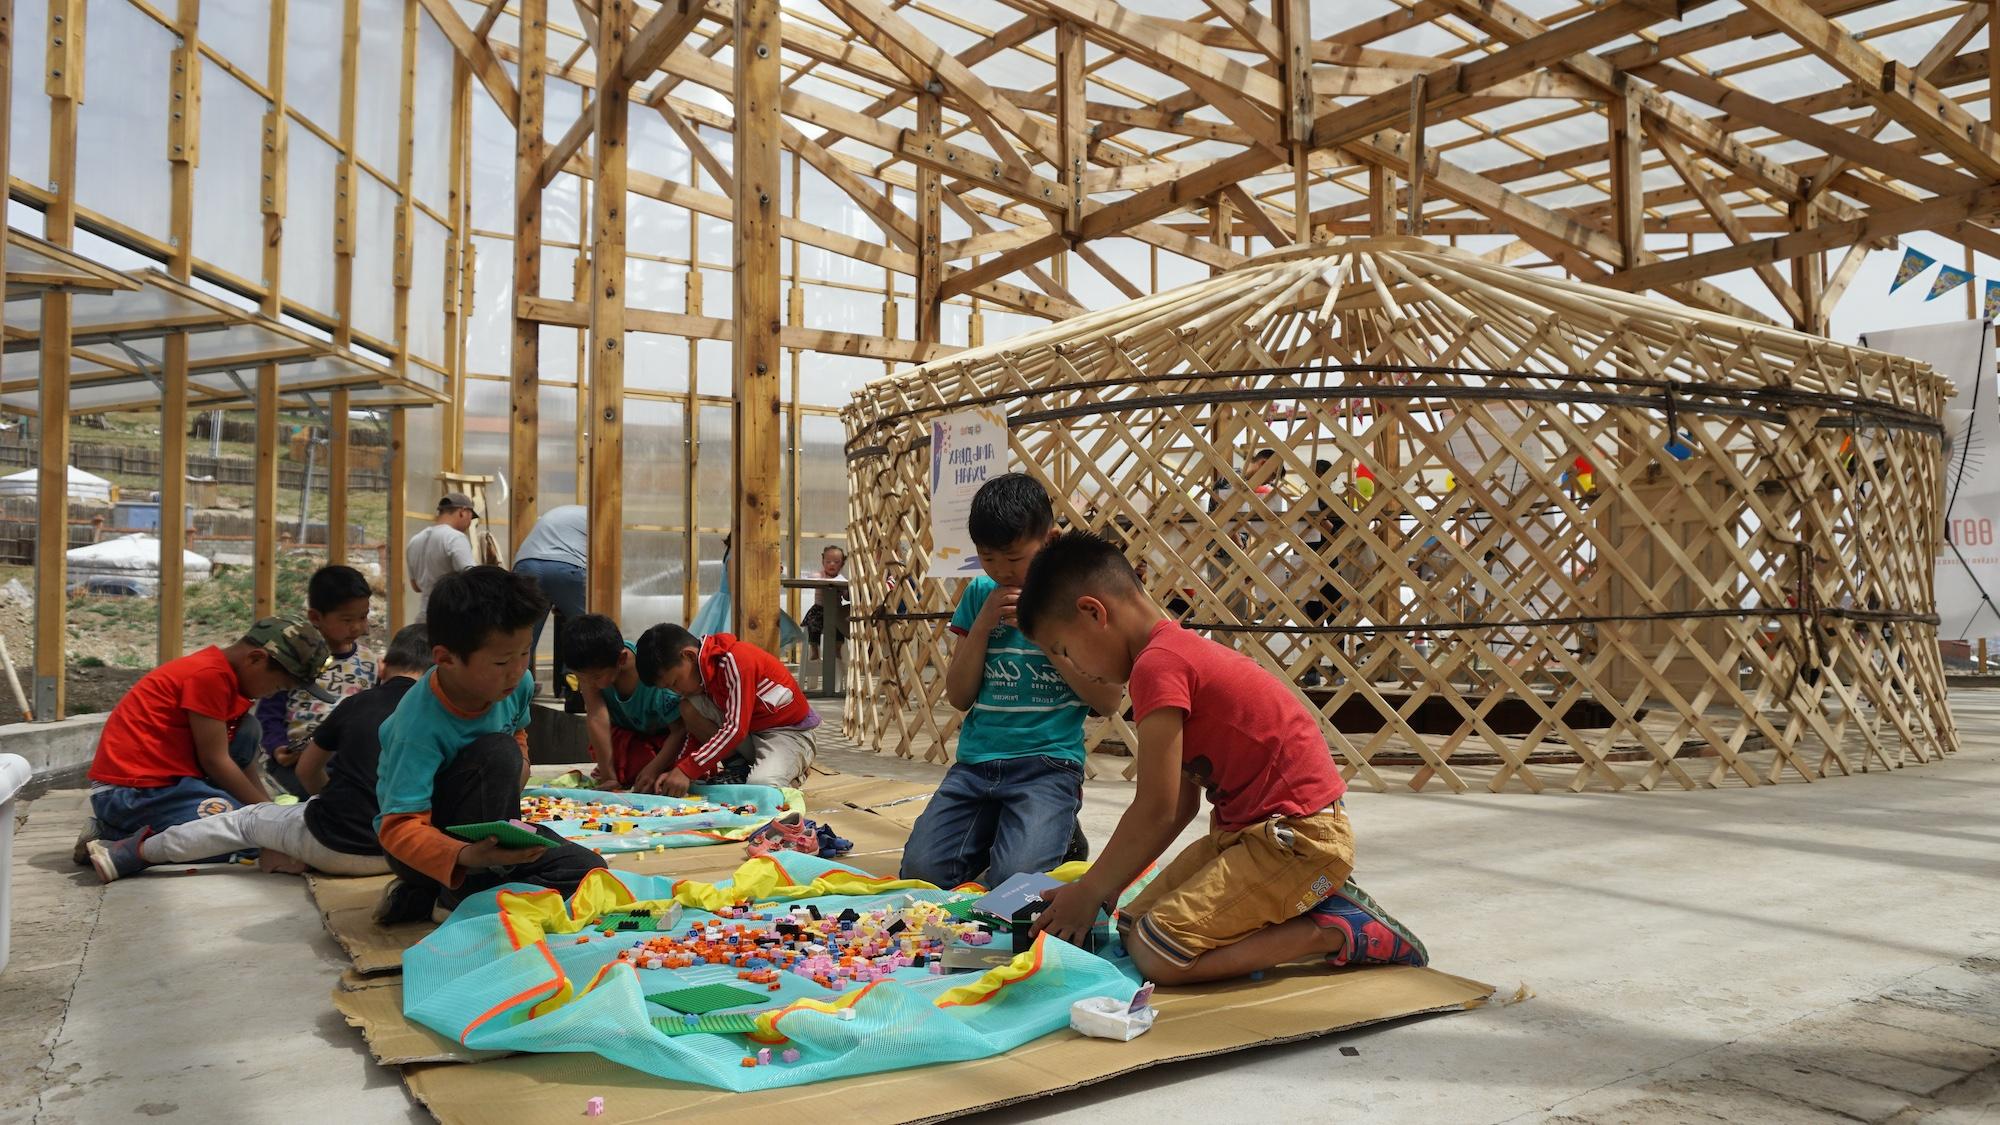 A group of children sit on the floor of a wood-framed and glass-clad structure. 孩子们正在与五颜六色的材料互动.